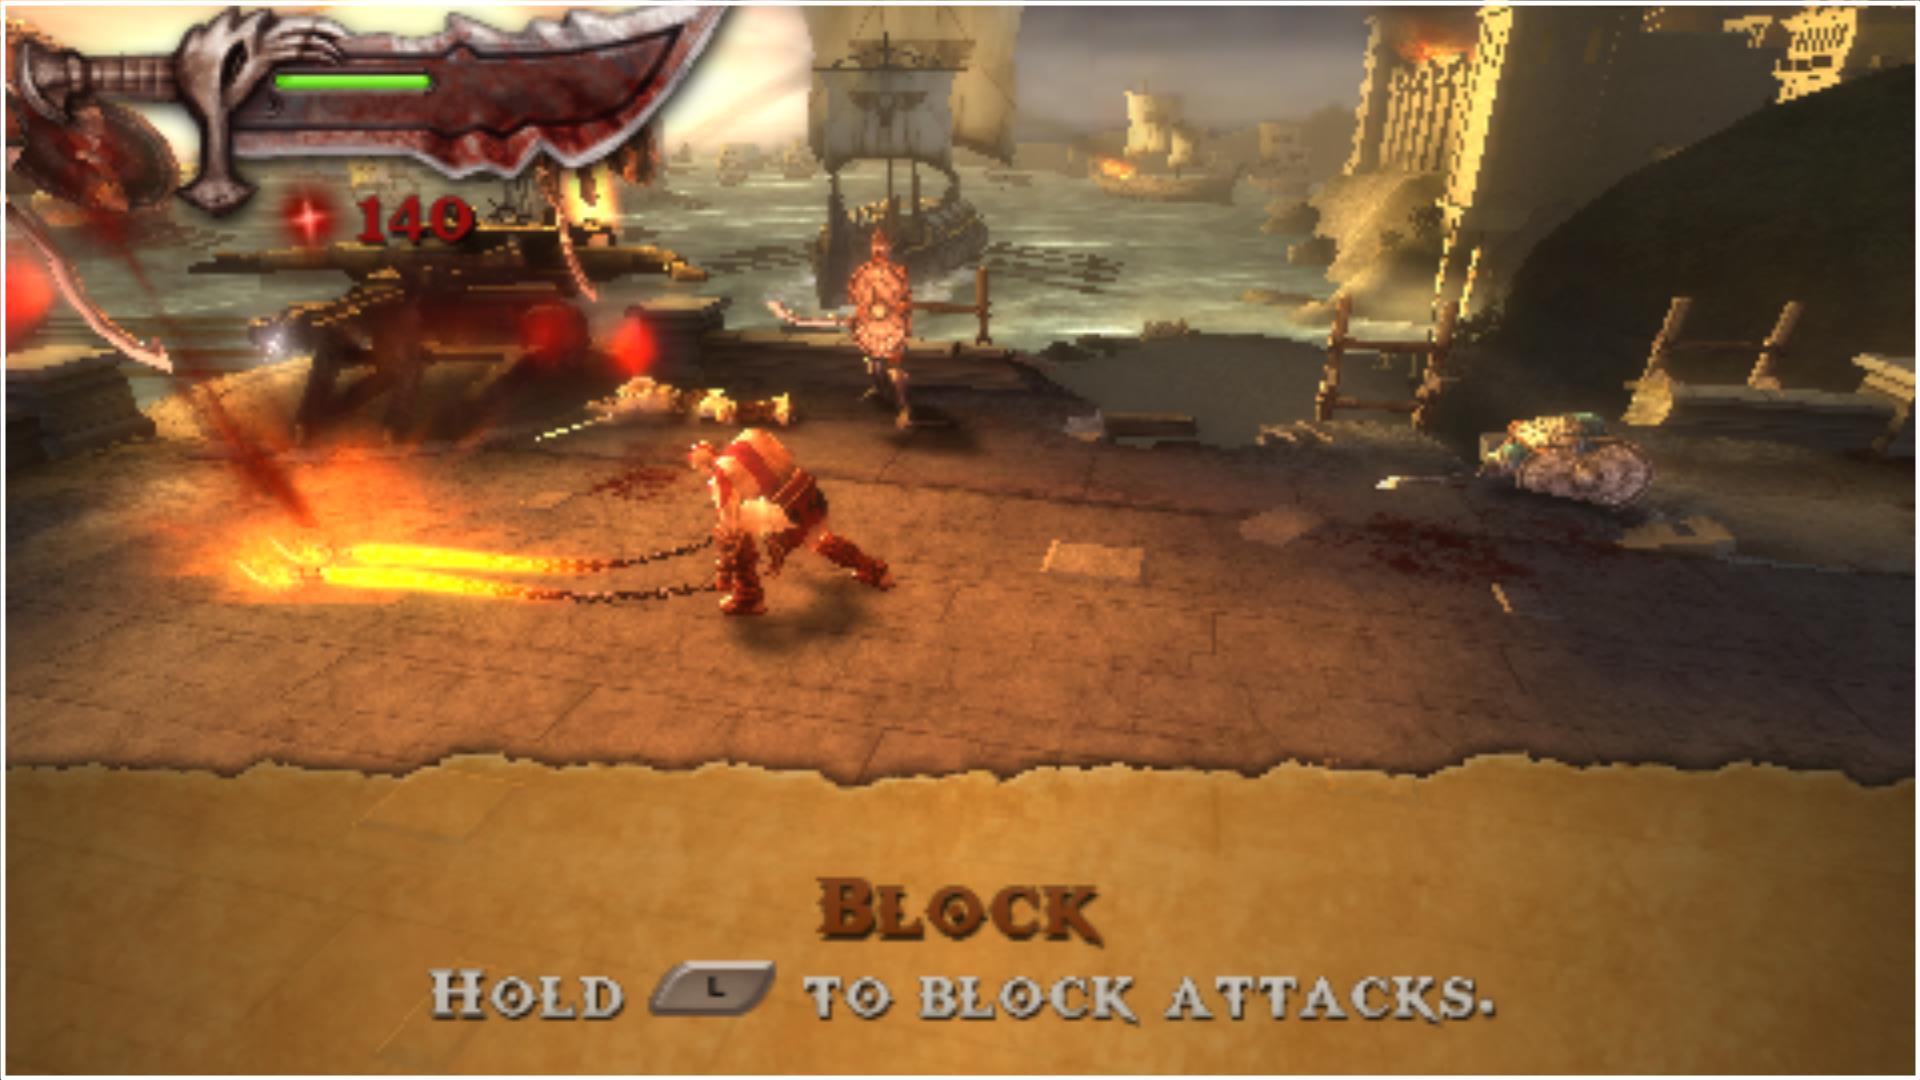 God Of War: Chains Of Olympus Download - GameFabrique